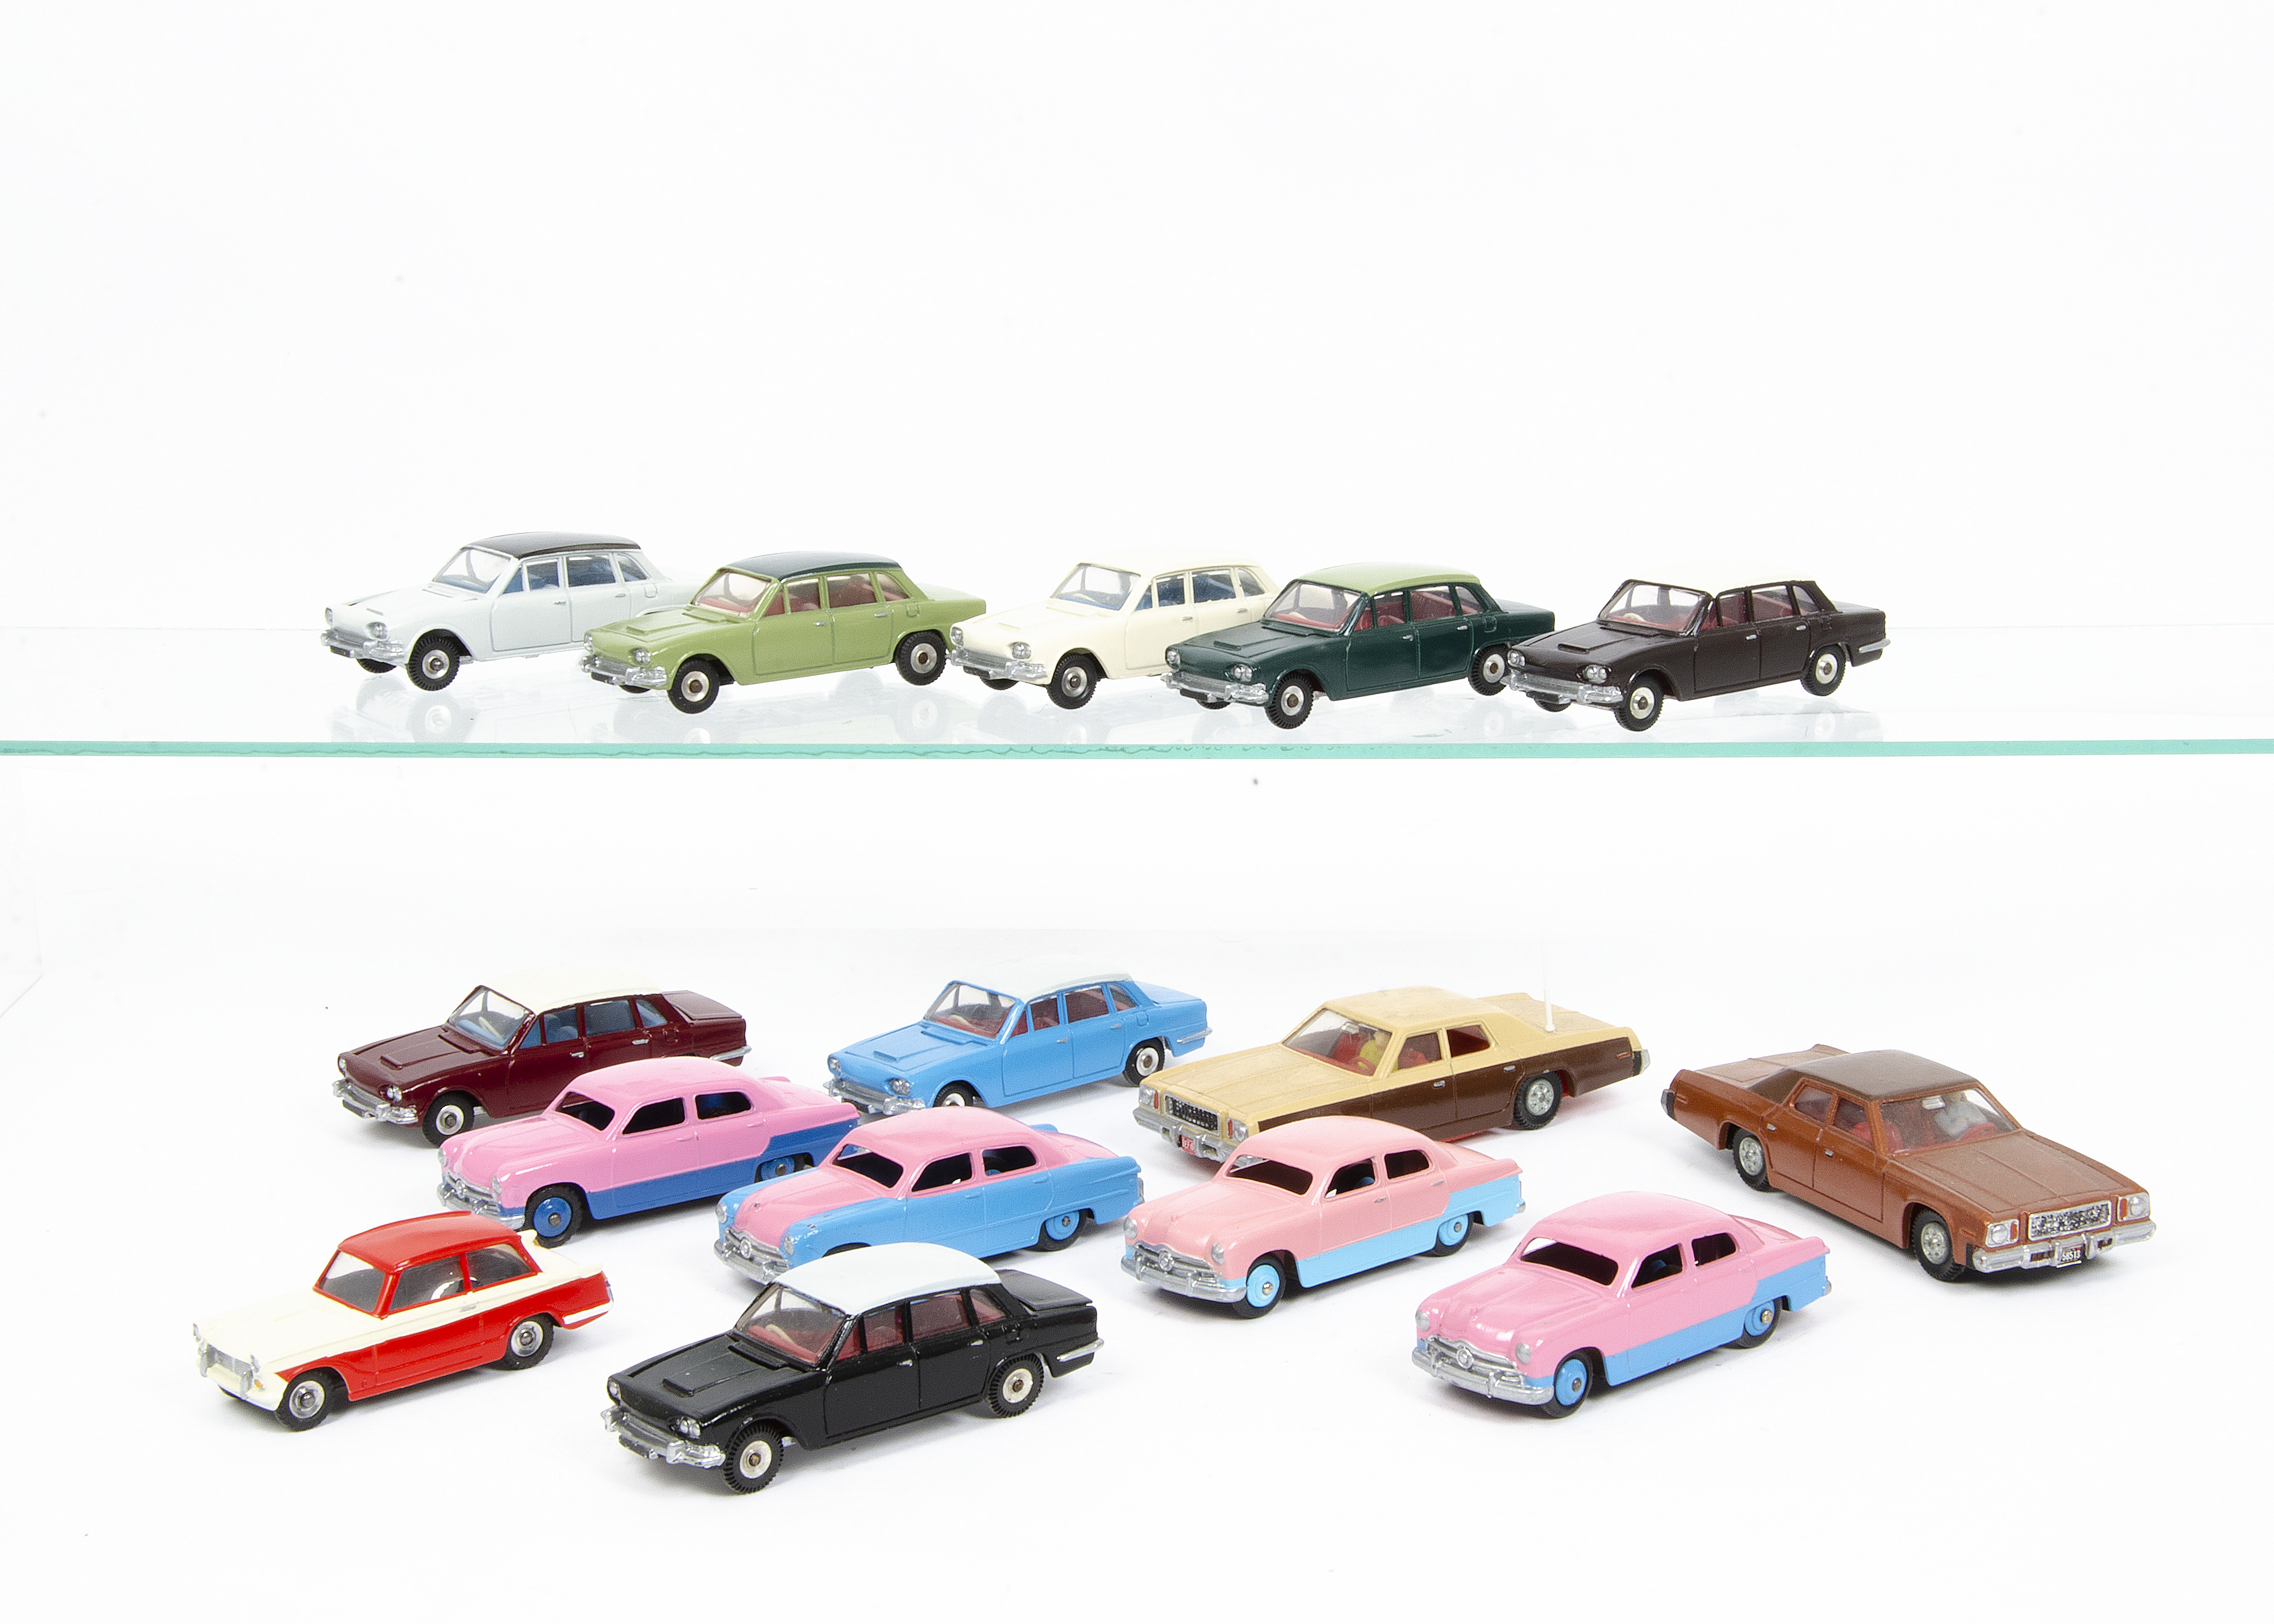 Restored/Repainted Dinky Cars, including Ford Sedan (4), 135 Triumph 2000 (8) and others, majority